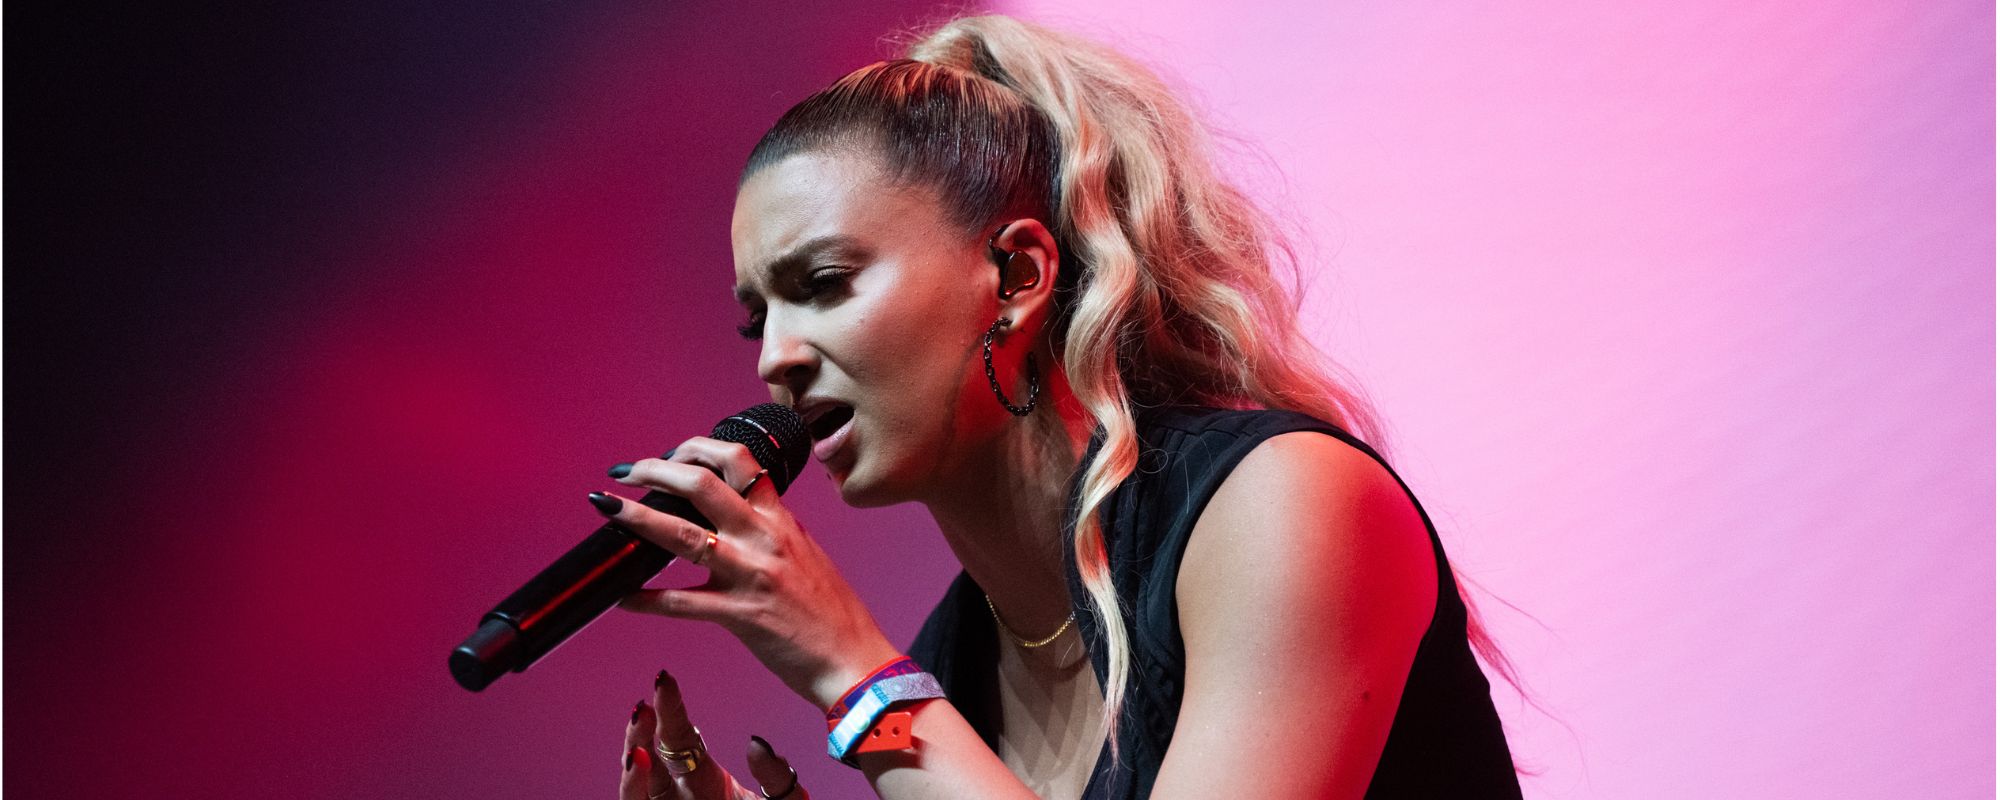 Report: Tori Kelly Hospitalized, In Serious Condition for Blood Clots